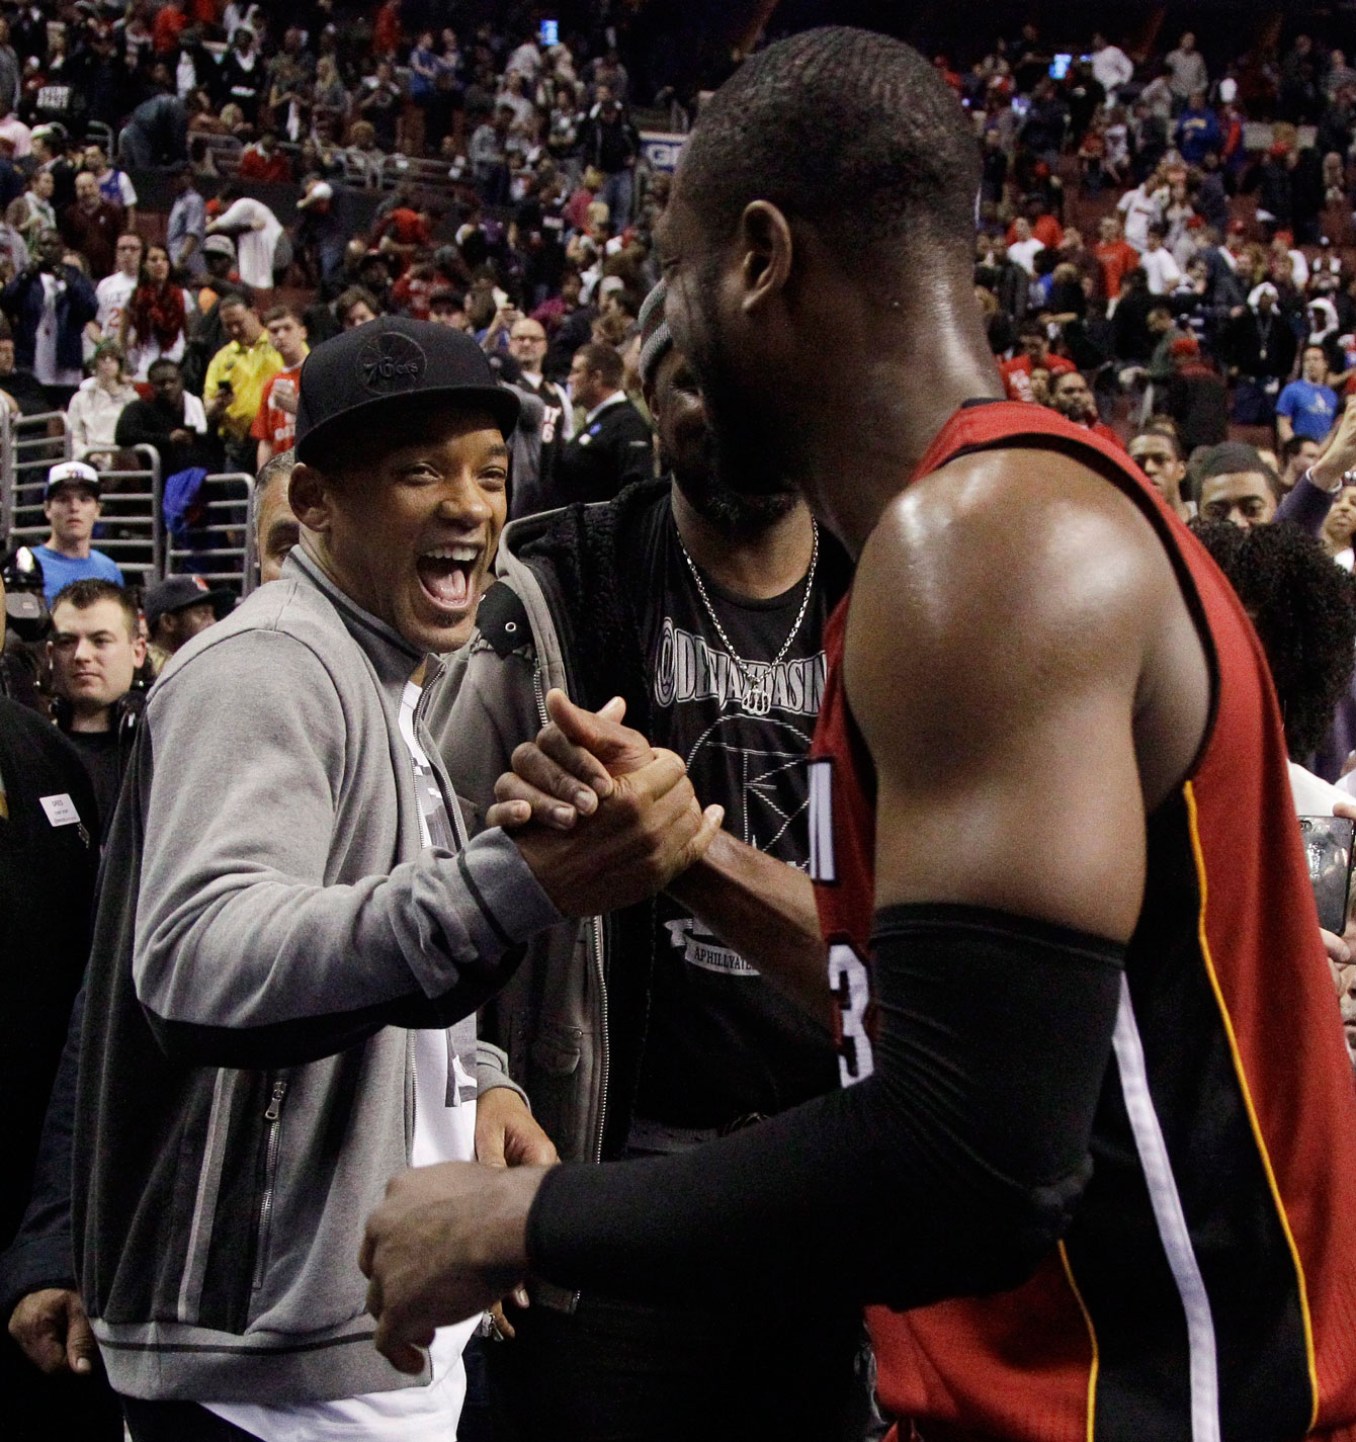 Will Smith shaking hands with Dwyane Wade. Photo: CP